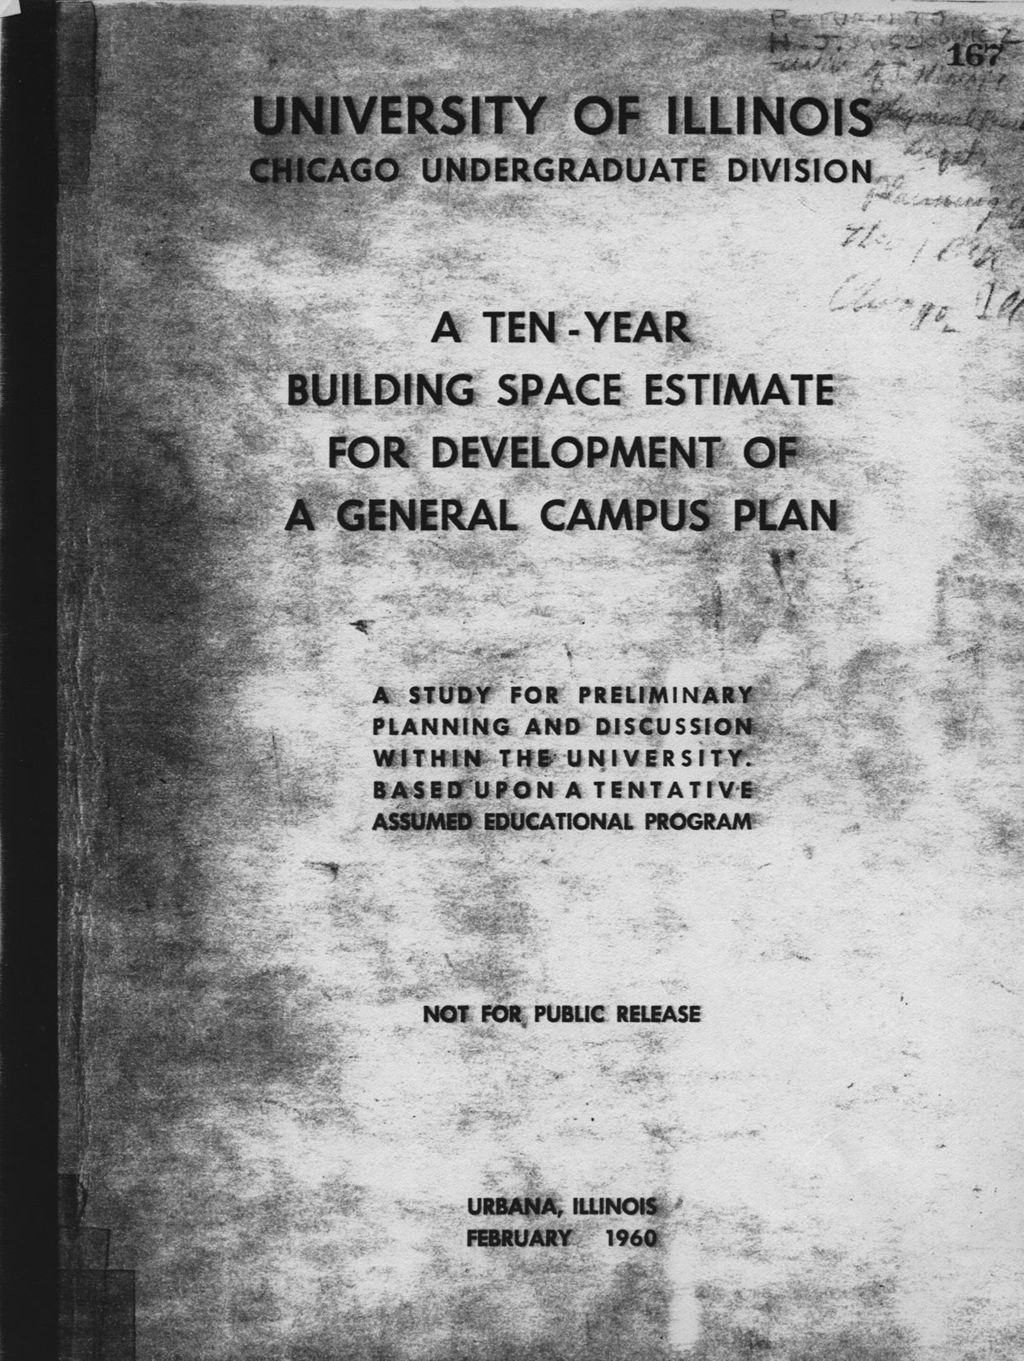 Miniature of A Ten-Year Building Space Estimate for Development of a General Campus Plan, University of Illinois, Chicago Undergraduate Division